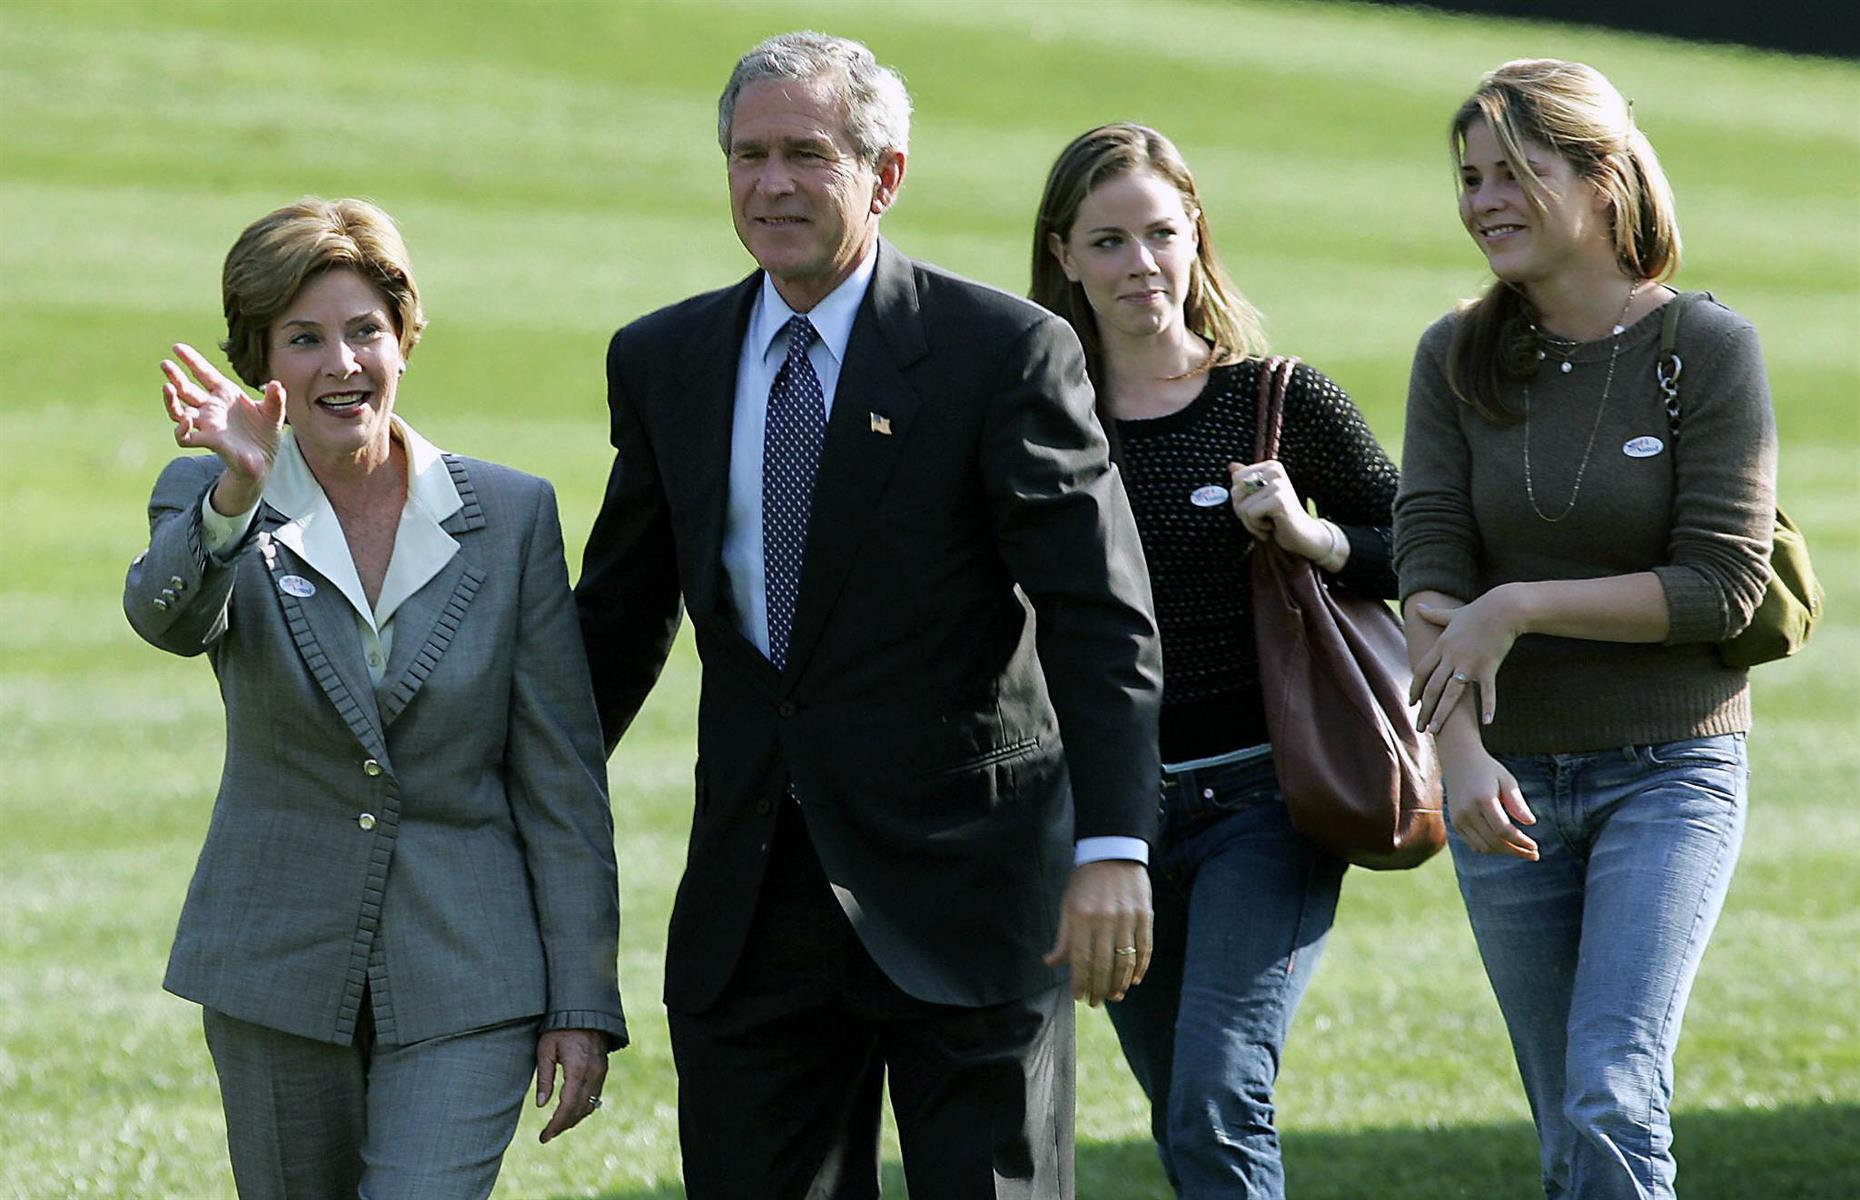 <p>While best known for its deep-rooted political links, the Bush family has actually made a $400 million fortune in various ways over the decades. </p>  <p>As well as producing two American presidents – George W Bush and his father George H W Bush served as the 43rd and 41st Presidents of the United States respectively – the clan has dabbled in everything from banking and steel to oil and even fashion over the decades, adding to the family fortune along the way.</p>  <p><strong>Read on to trace the dynasty's rise to riches and power, and find out what the wealthiest family members are worth these days. </strong></p>